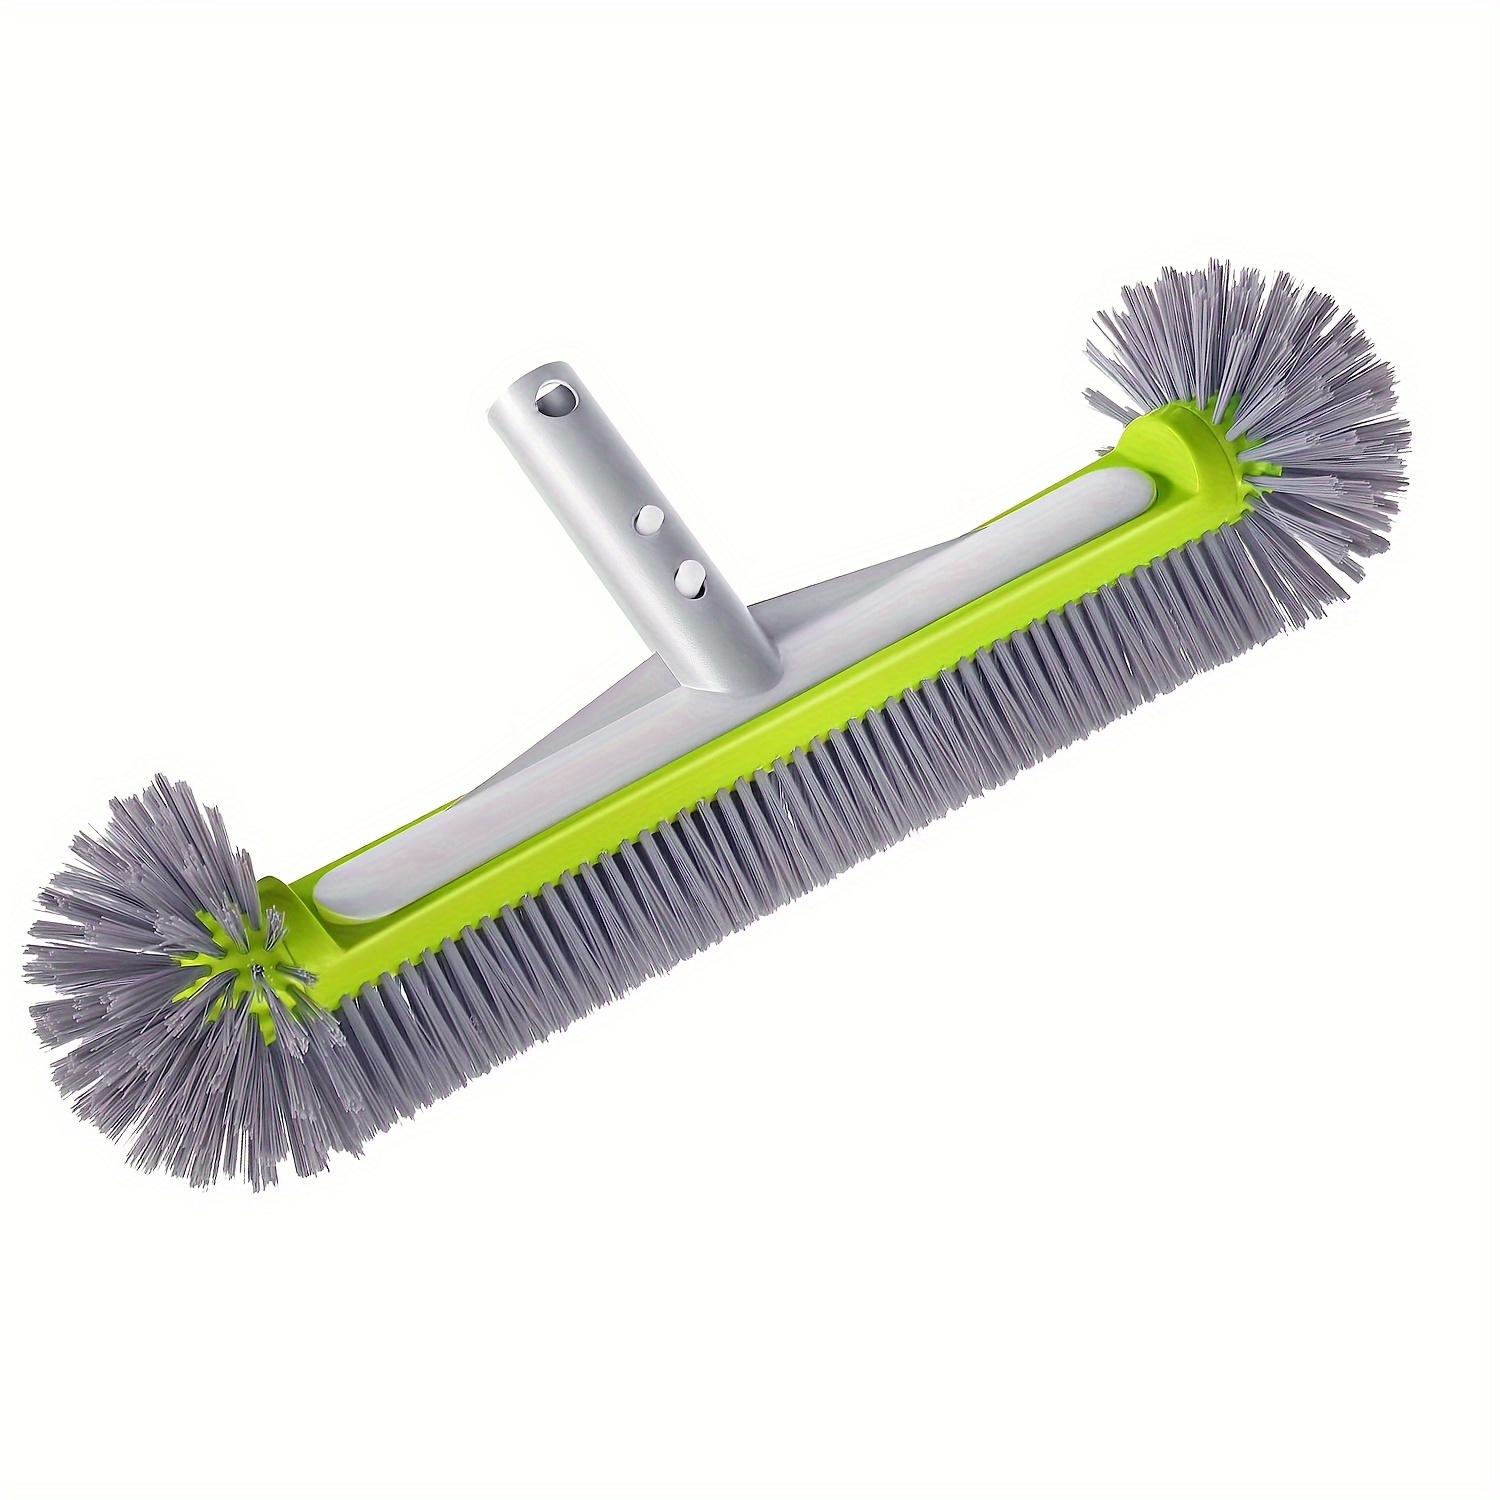 

1pc, Pool Brush Head With Round Ends, 17.5" Heavy Duty Aluminum Back 7 Rows Nylon Bristles Brush For Pool Wall Steps Corner, Cleaning Brush For Pool Home Bathroom